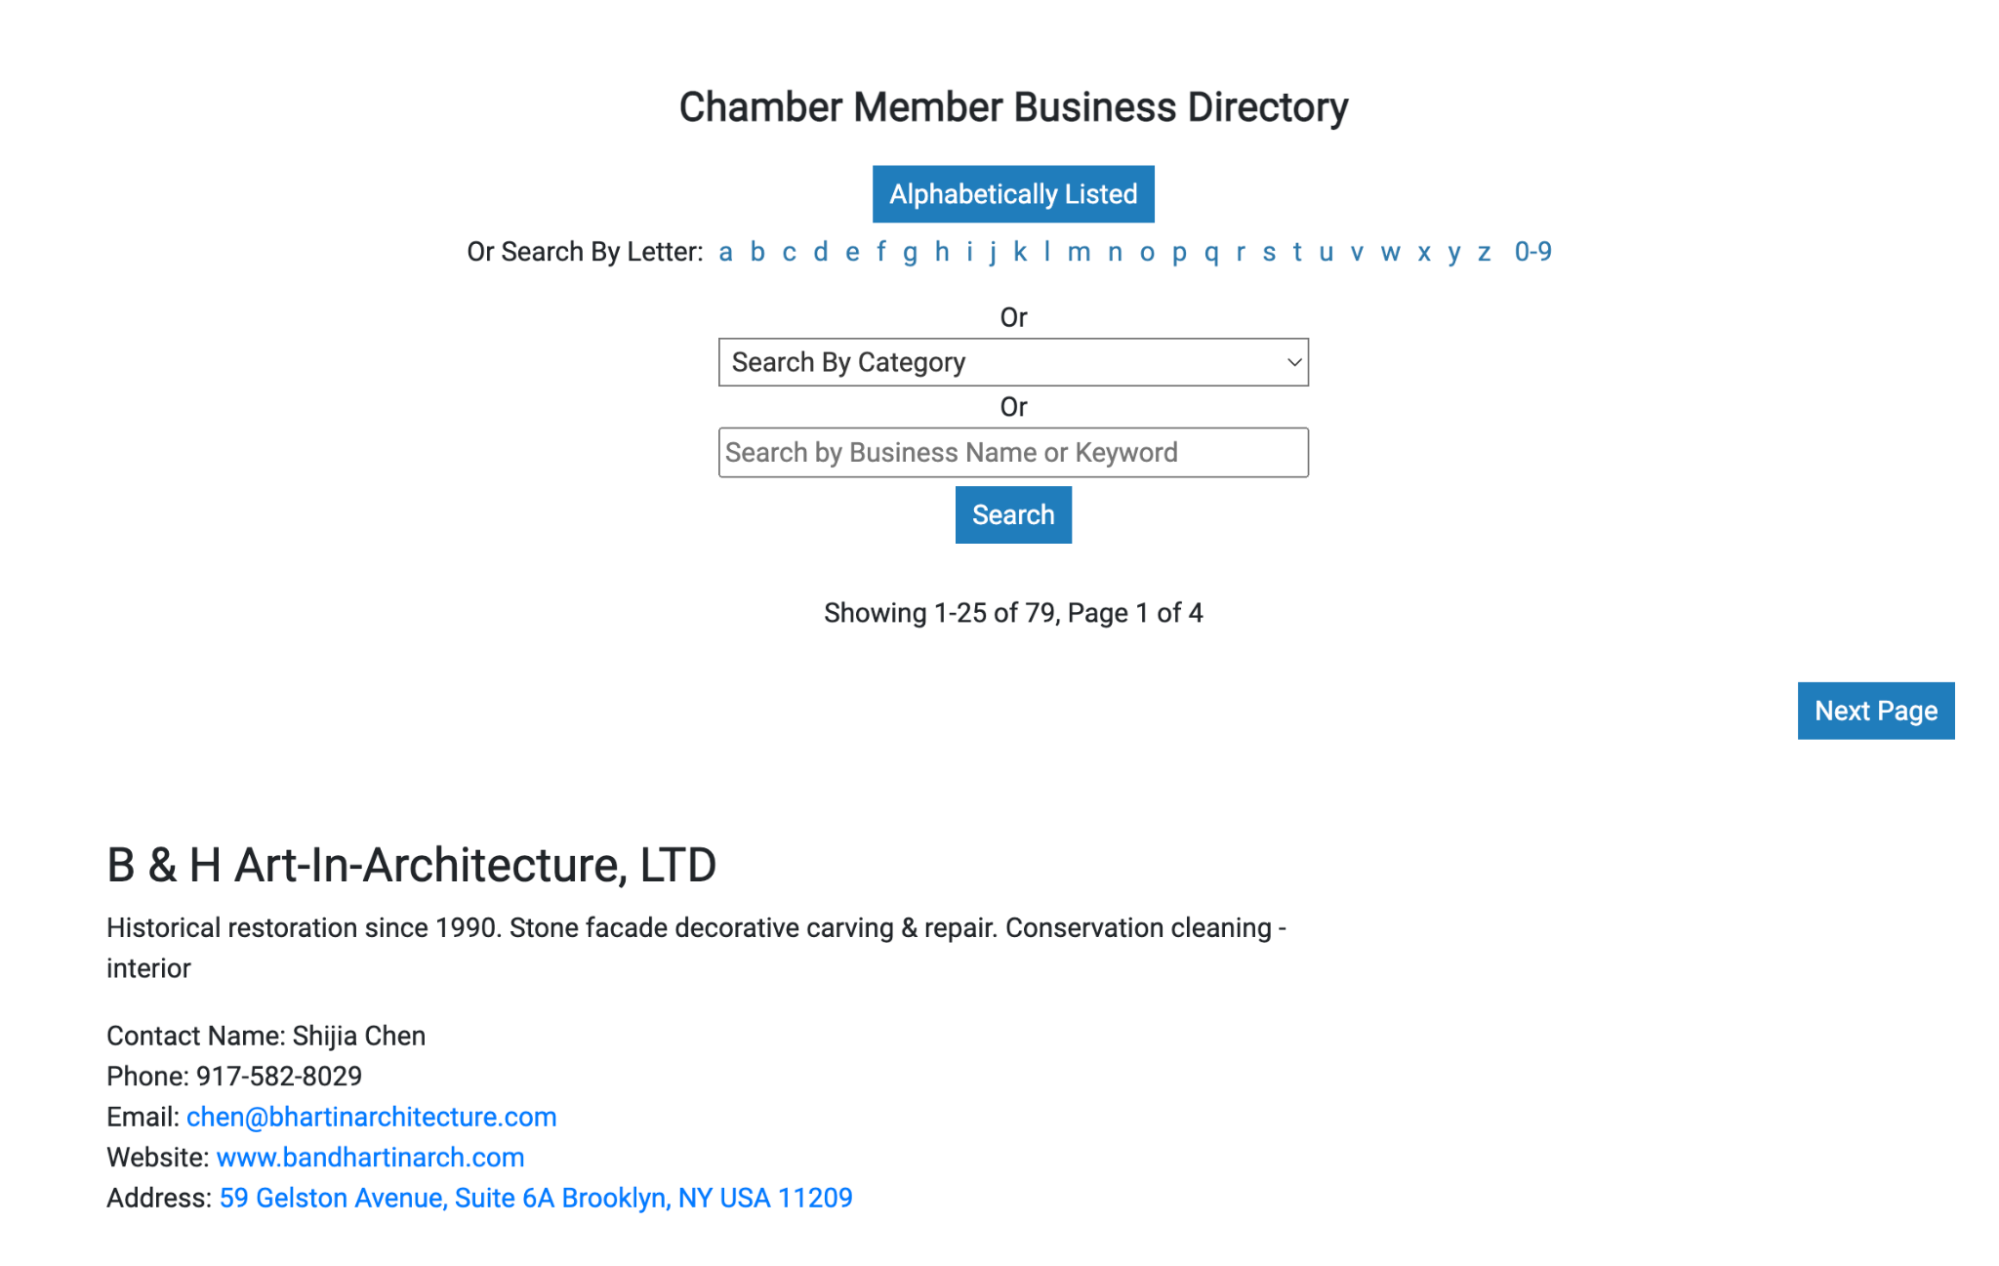 Chamber of Commerce’s NYC business directory showing a local architecture firm.